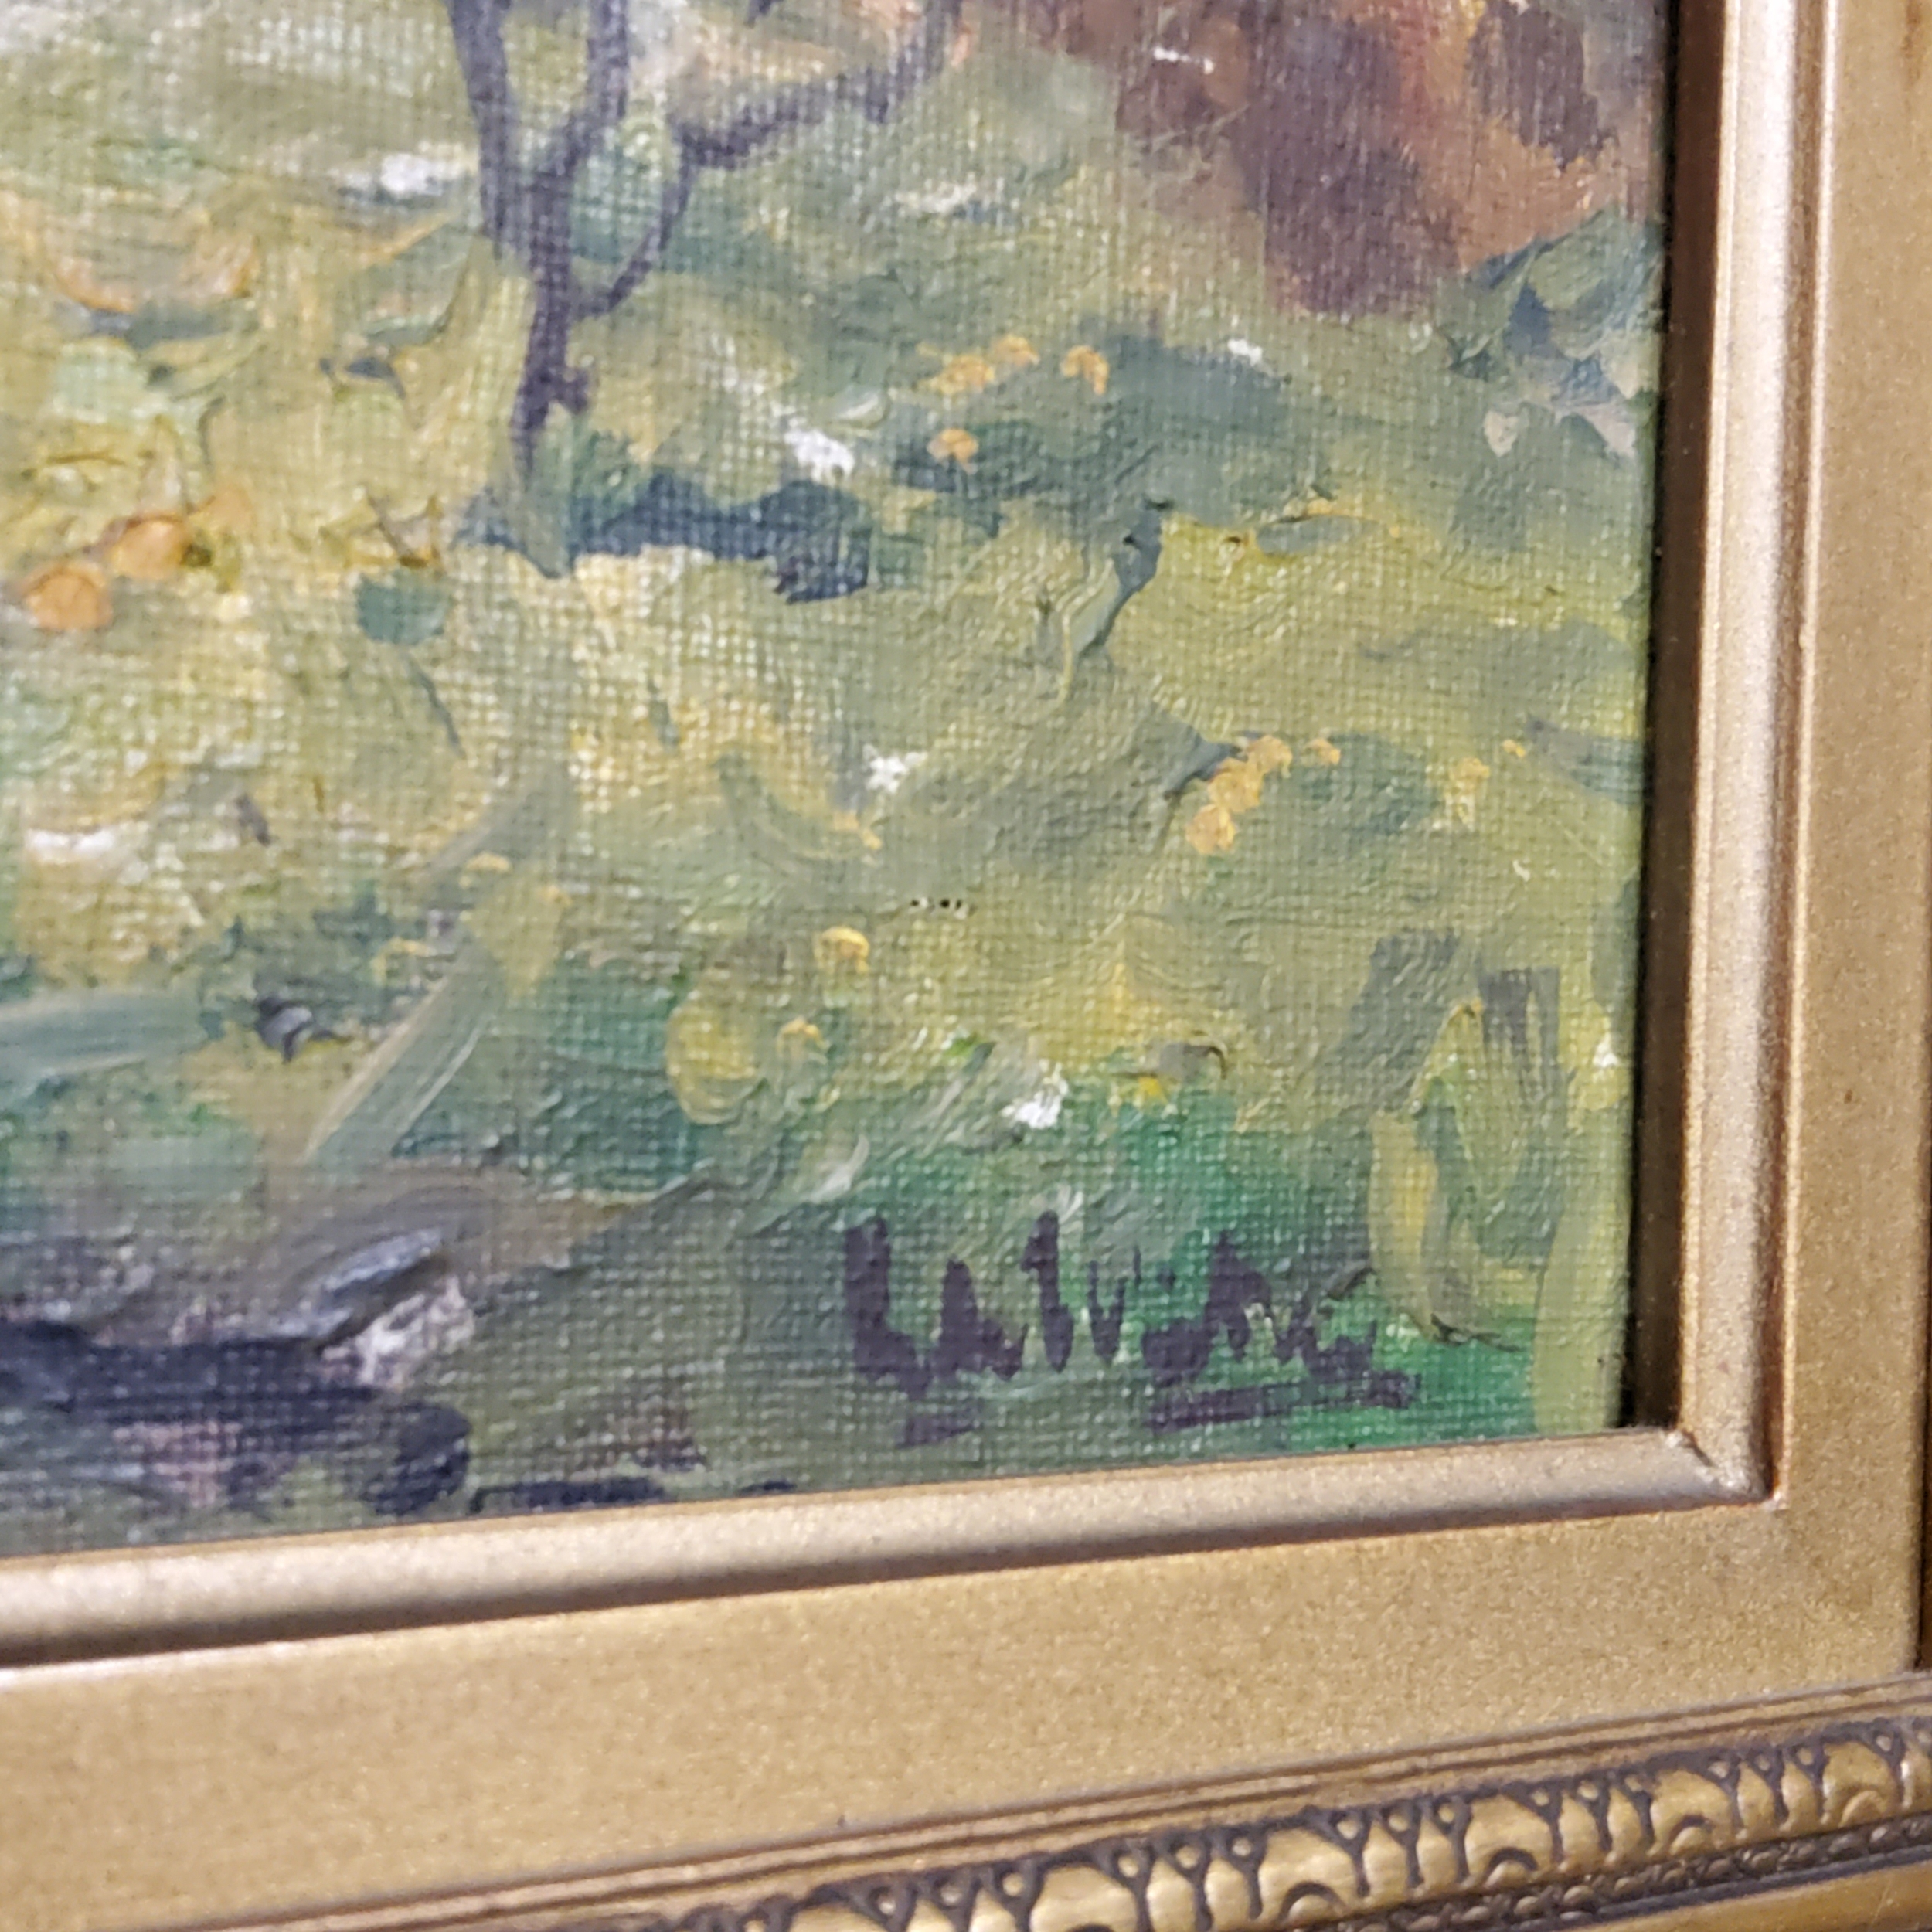 Dutch School (Early 20th century) Country House  Oil on canvas, indistictly signed. Period ornate - Image 2 of 3